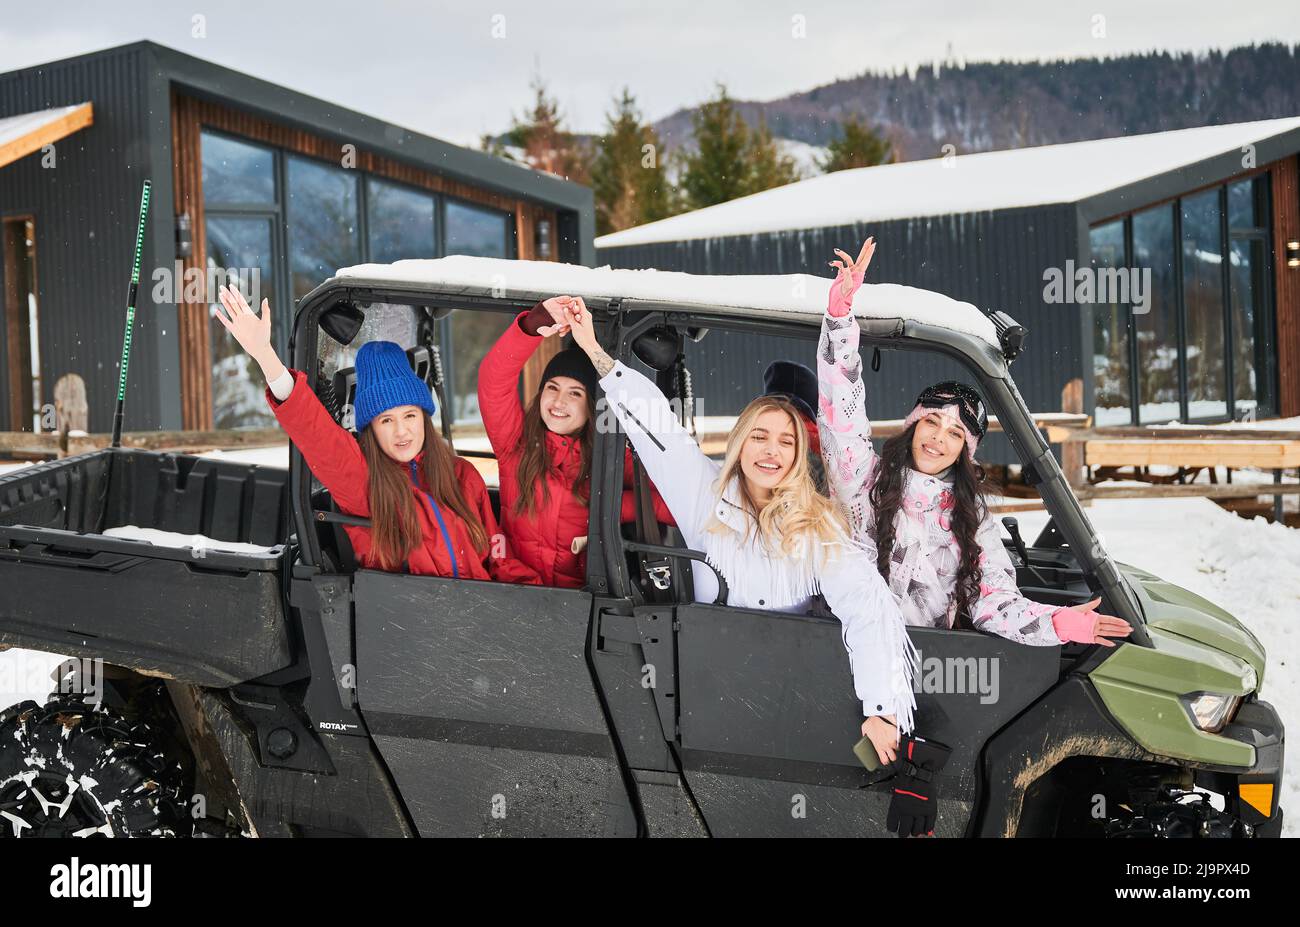 Happy women riding on off-road buggy car. Contemporary barnhouse on background. Concept of active leisure and winter activities. Stock Photo